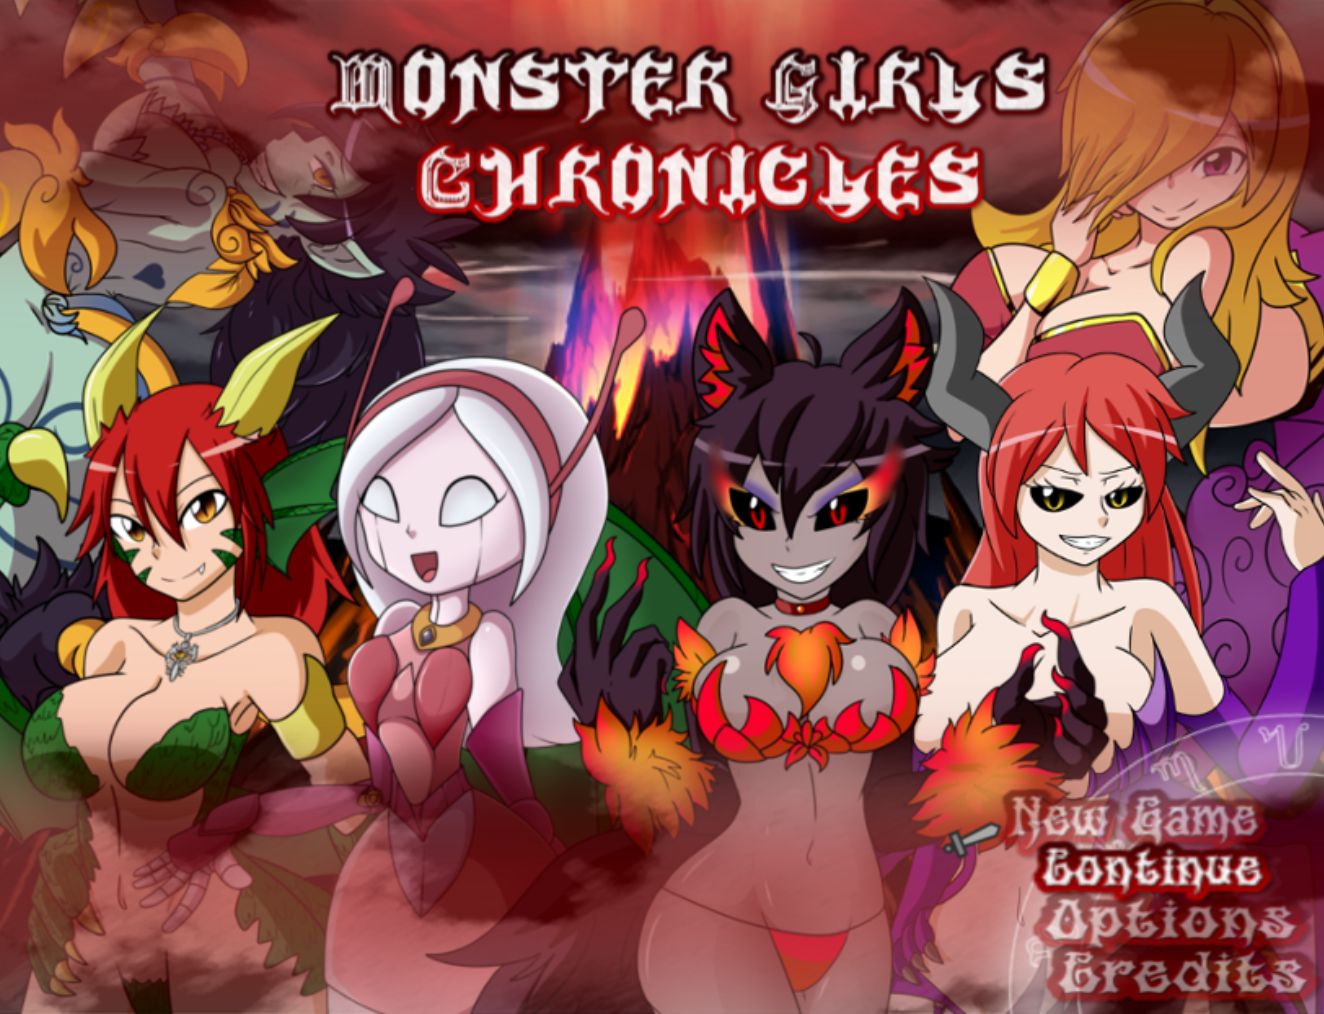 Moster girl porn games